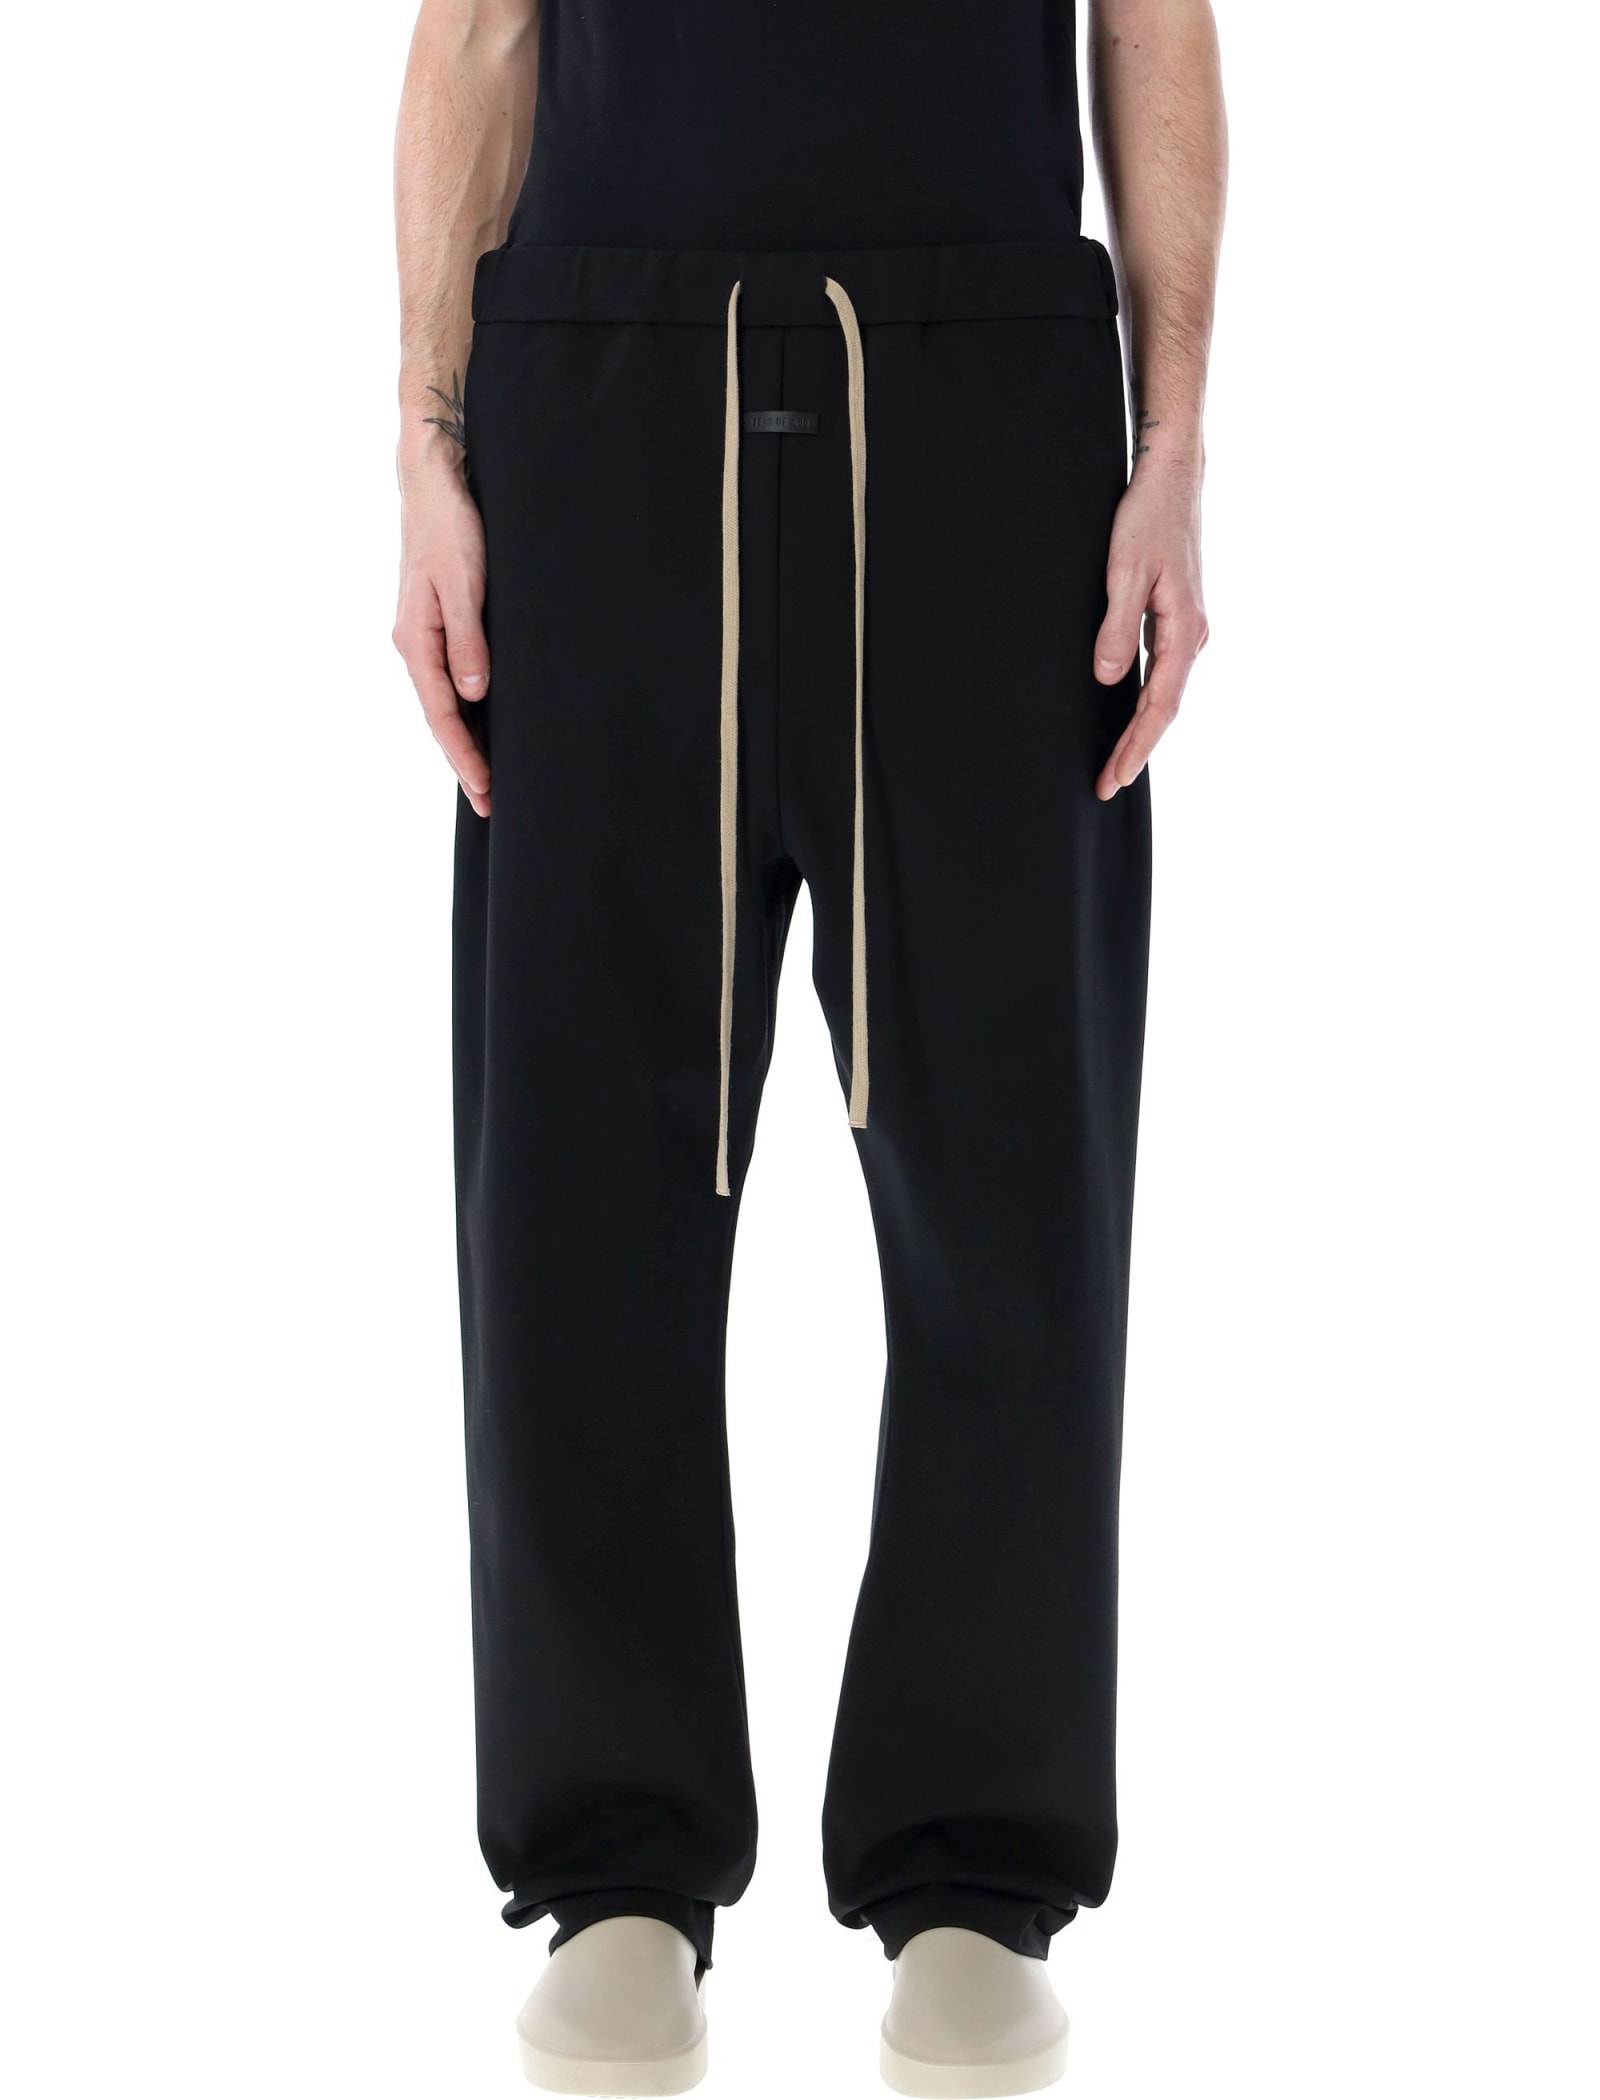 FEAR OF GOD THE ETERNAL RELAXED PANT